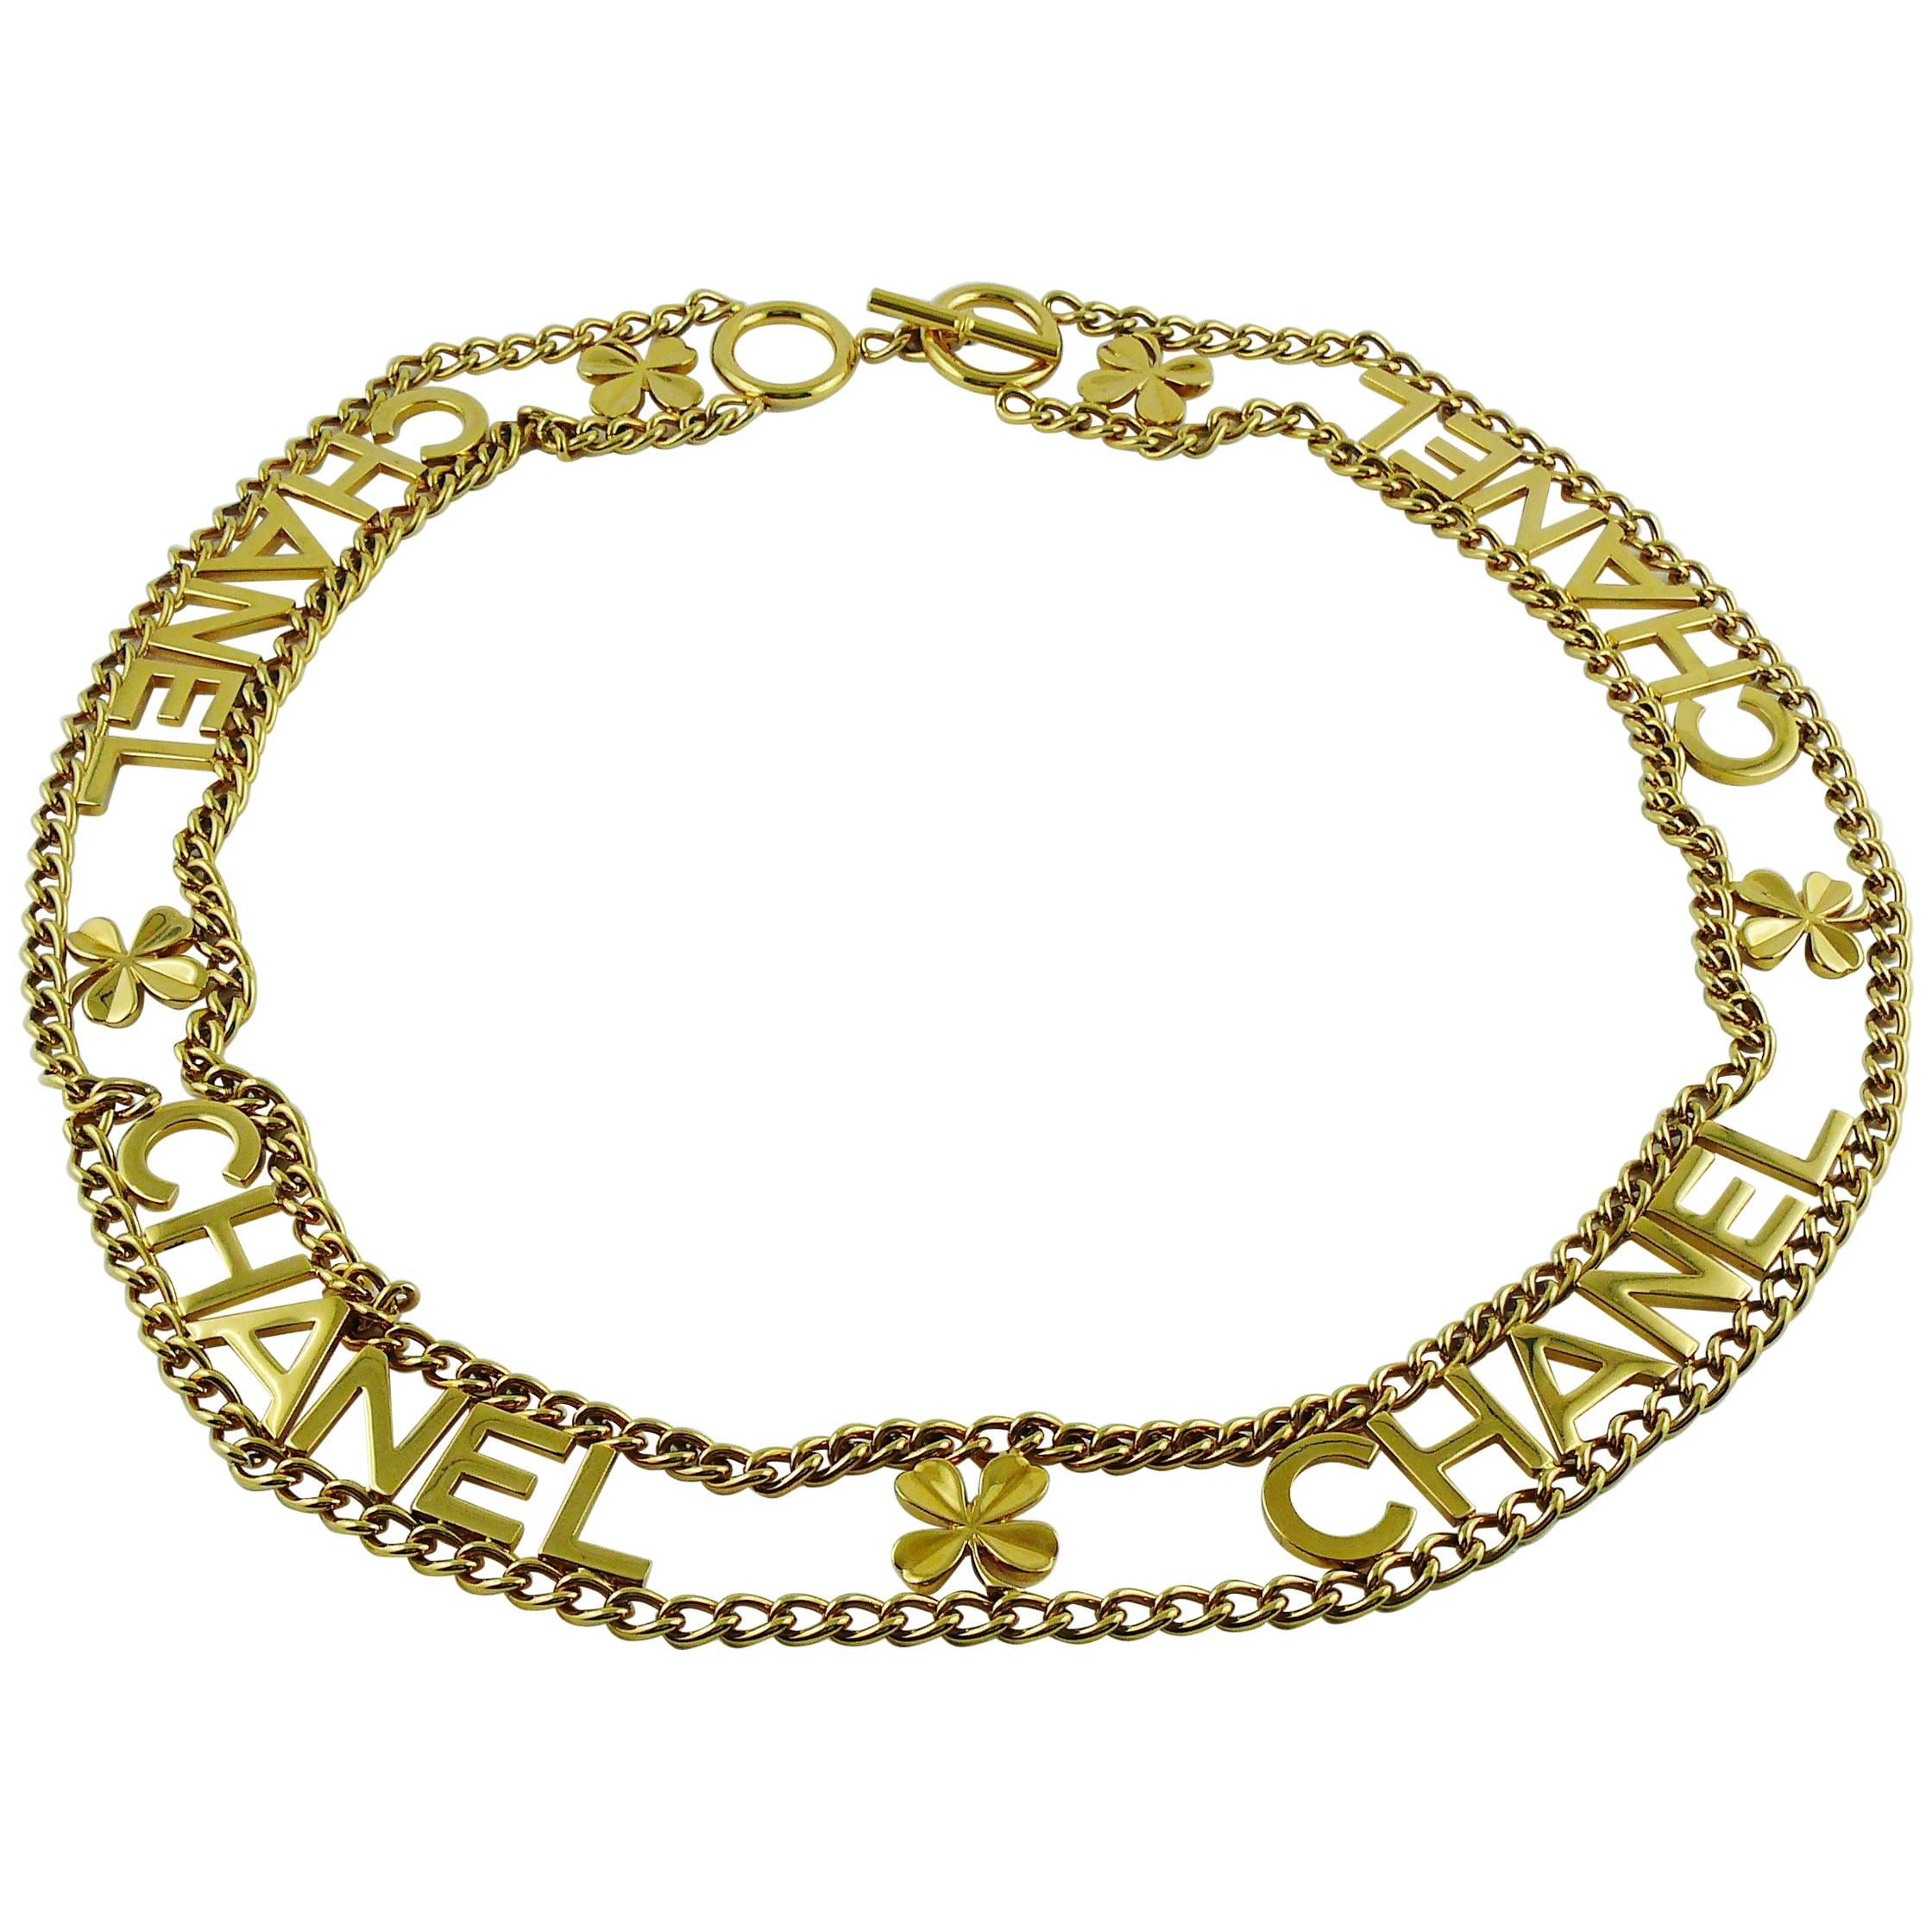 1990s Chanel Gold Toned Chain Belt to 36 w/Chanel CC Pendant